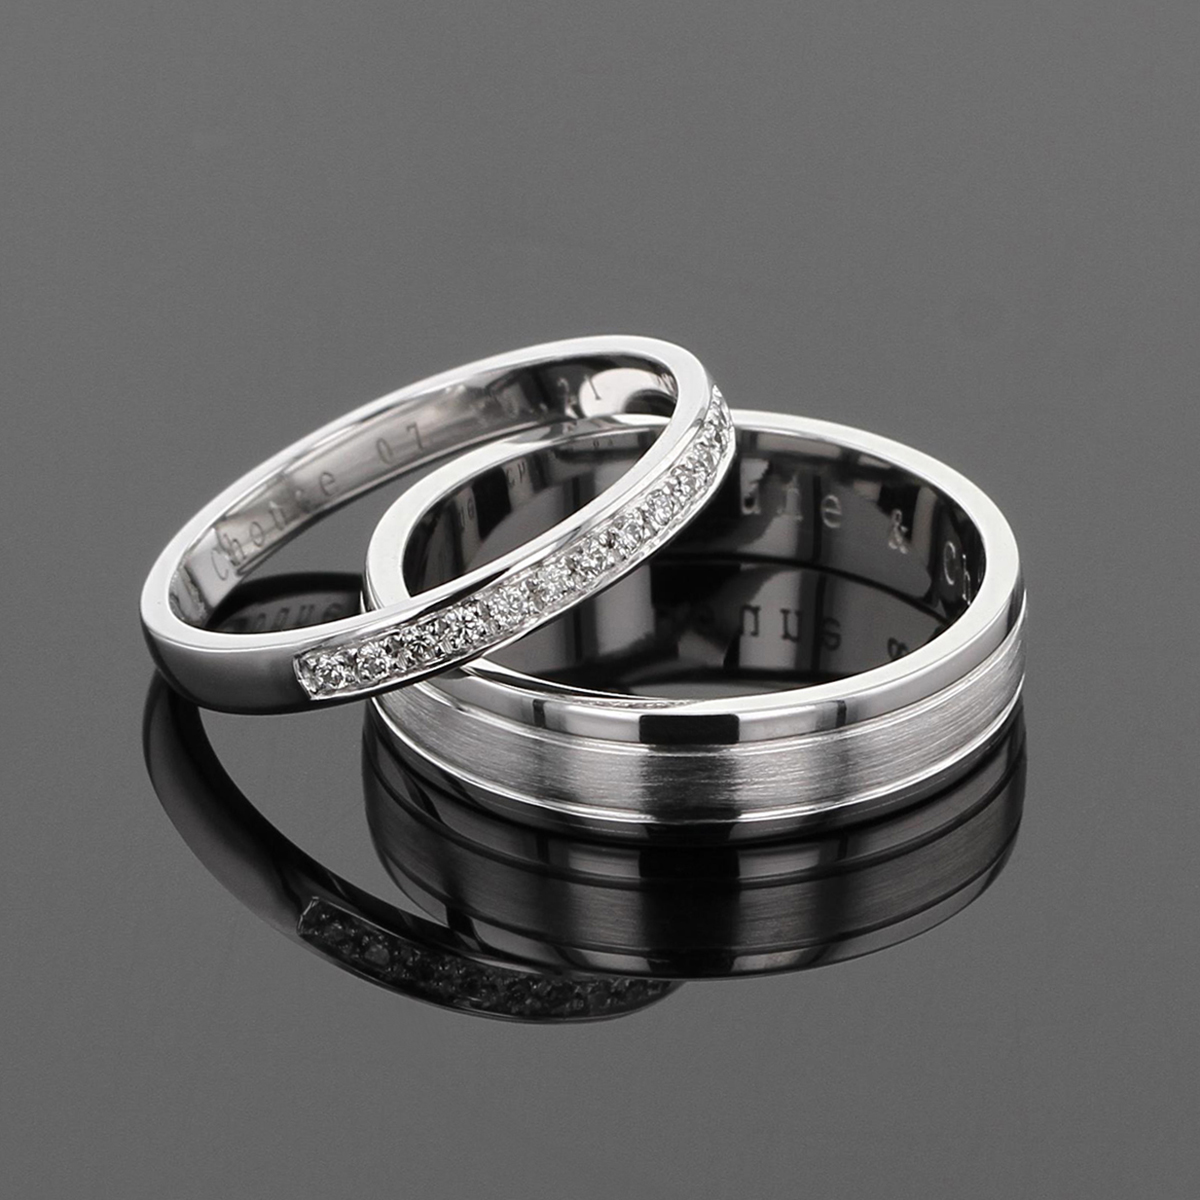 Polished and matted wedding band in white gold for him with a thinner, polished white gold and diamond ring for her